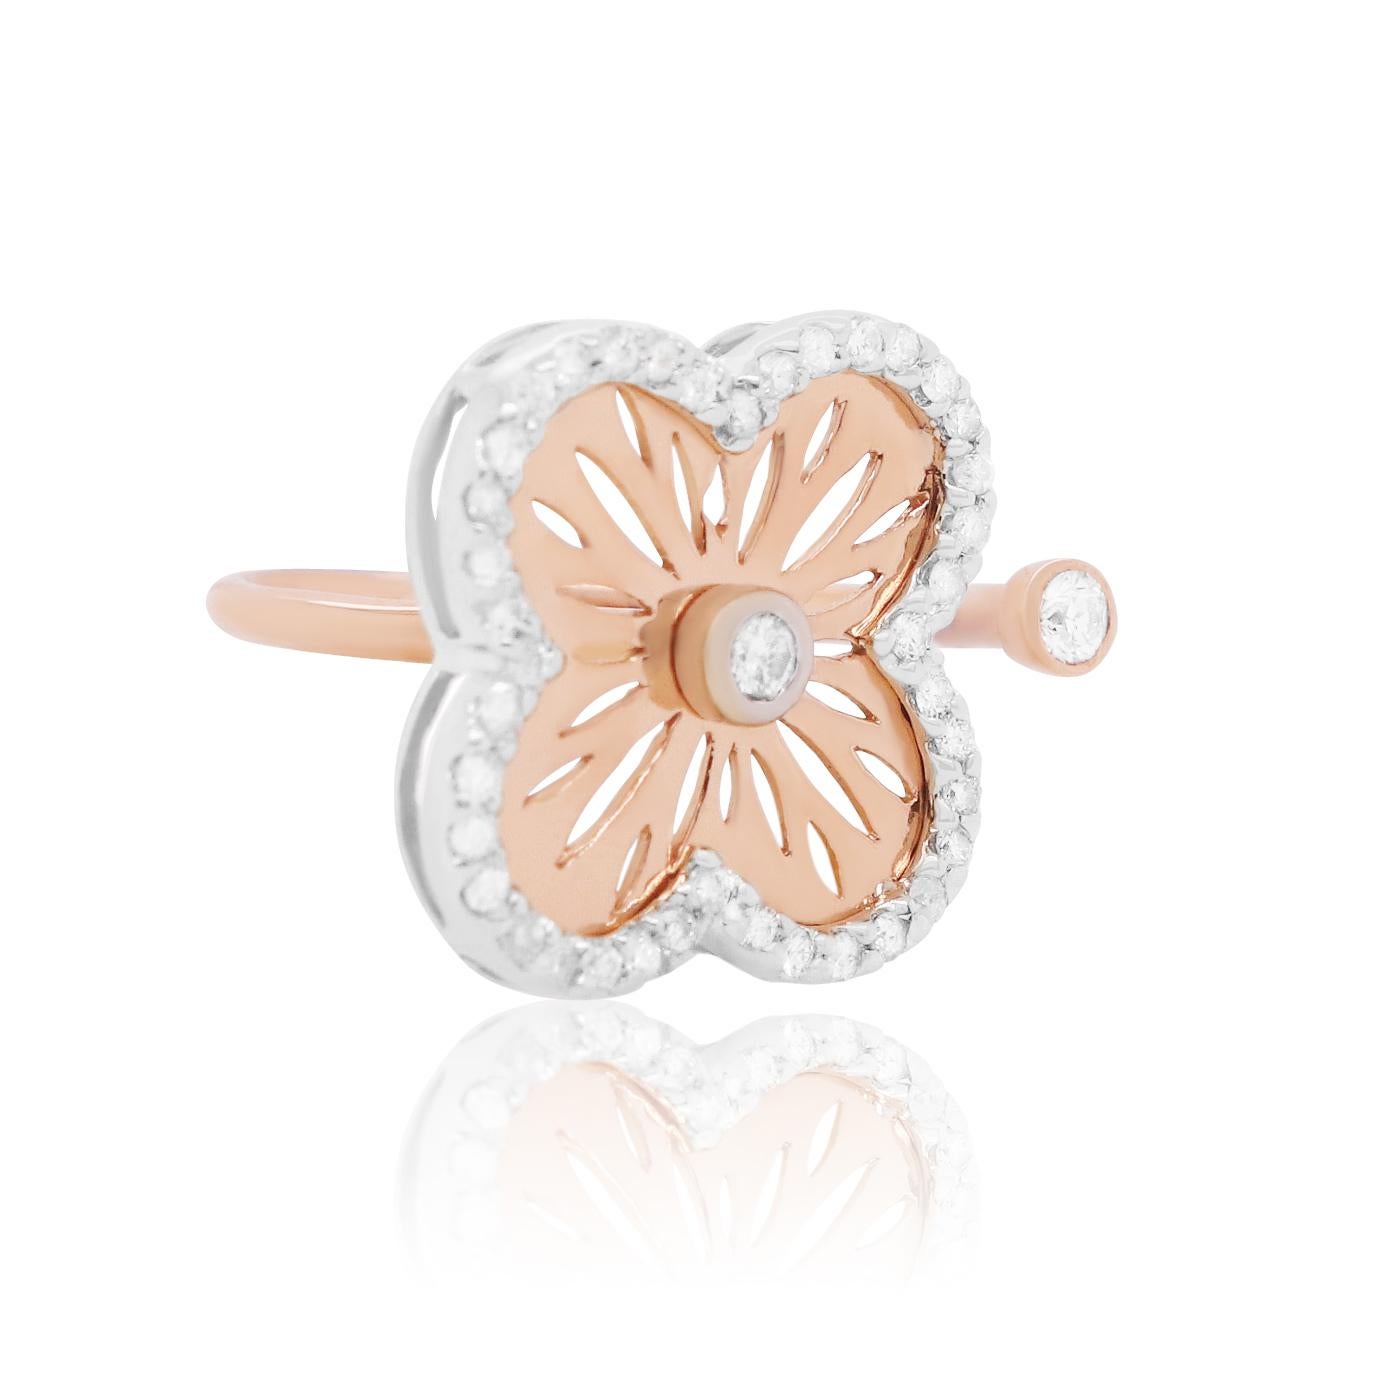 Material: 14k Rose Gold 
Diamond Details: 42 Brilliant Round White Diamonds at 0.43 Carats - Clarity: SI / Color: H-I
Complimentary ring sizing 

Fine one-of-a kind craftsmanship meets incredible quality in this breathtaking piece of jewelry.

All